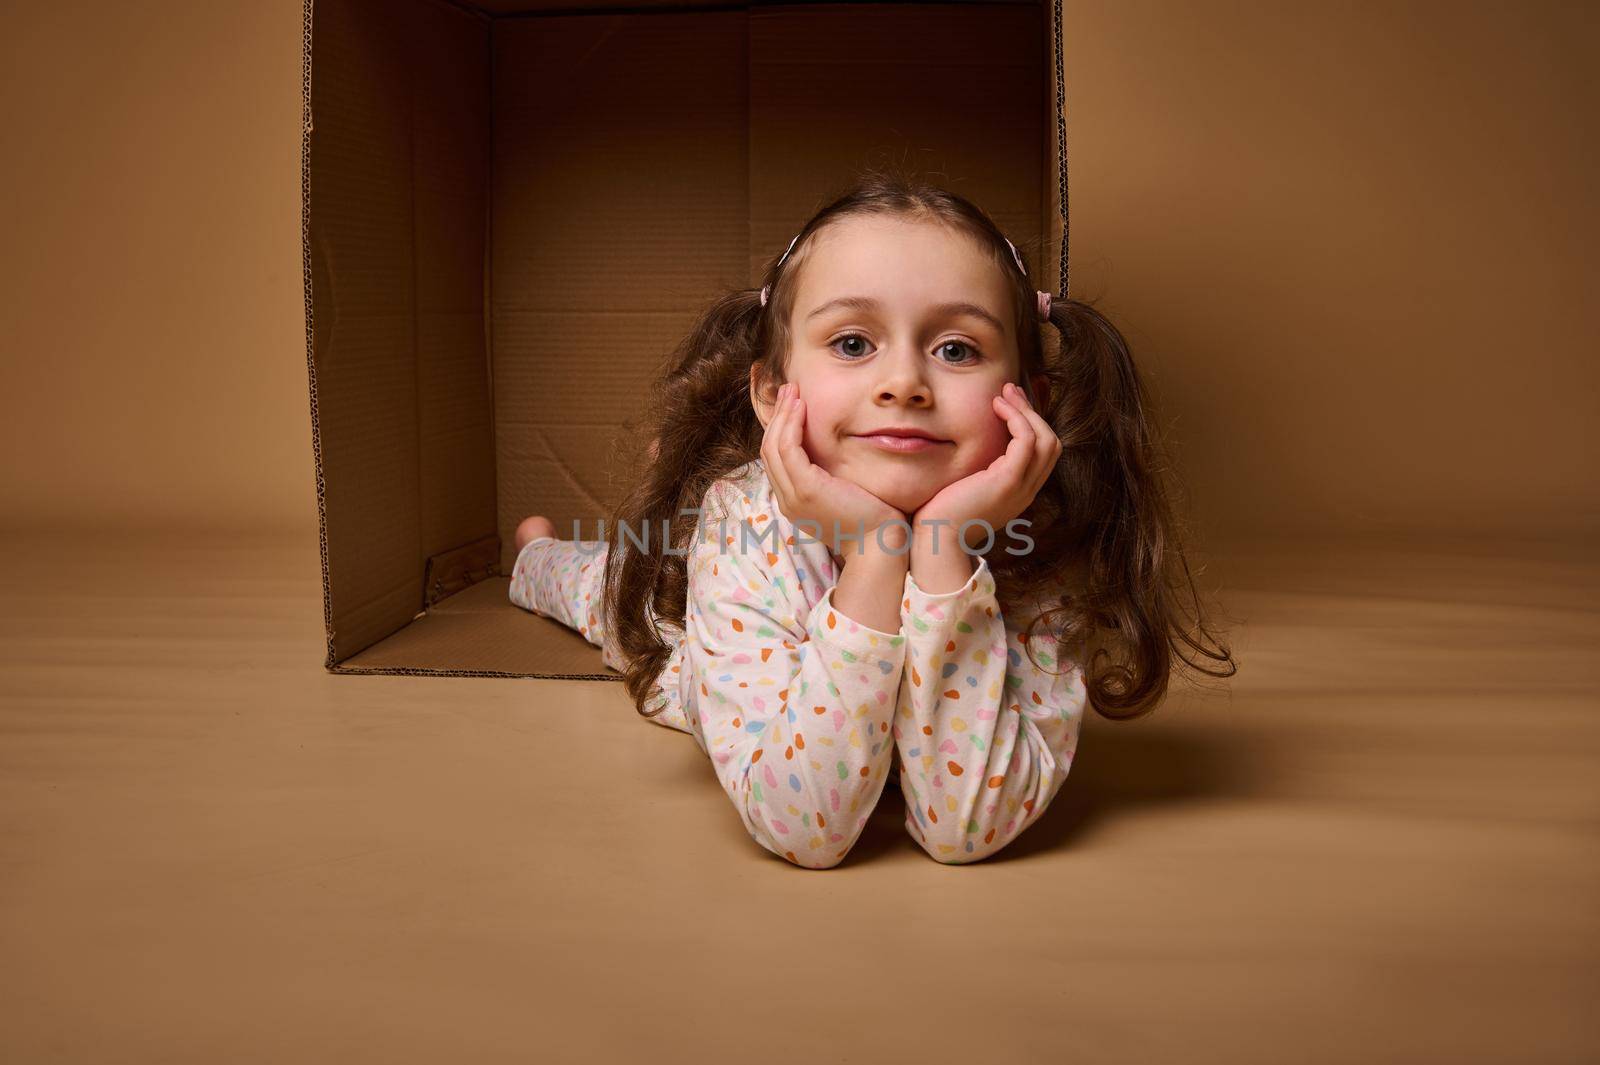 Smiling beautiful positive pleasant baby girlin pajamas with two ponytails inside a cardboard box, looking at camera isolated over beige background with copy space for ads by artgf